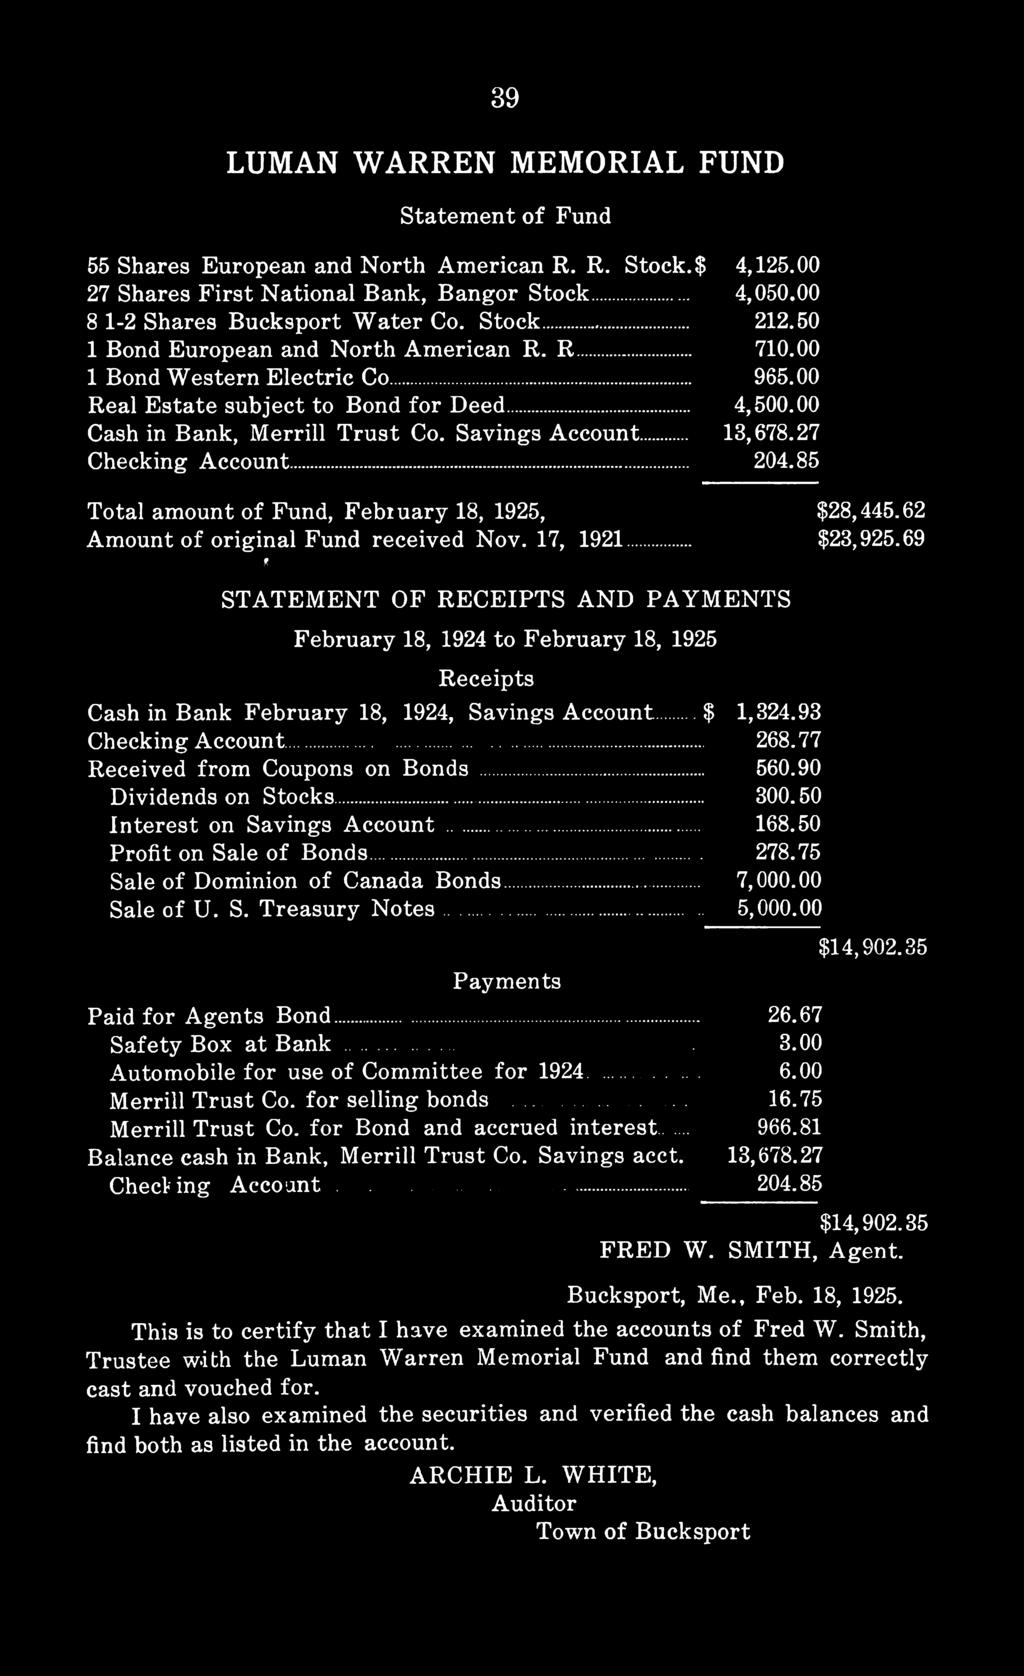 Savings Account... 13,678.27 Checking Account... 204.85 Total amount of Fund, February 18, 1925, $28,445.62 Amount of original Fund received Nov. 17, 1921... $23,925.